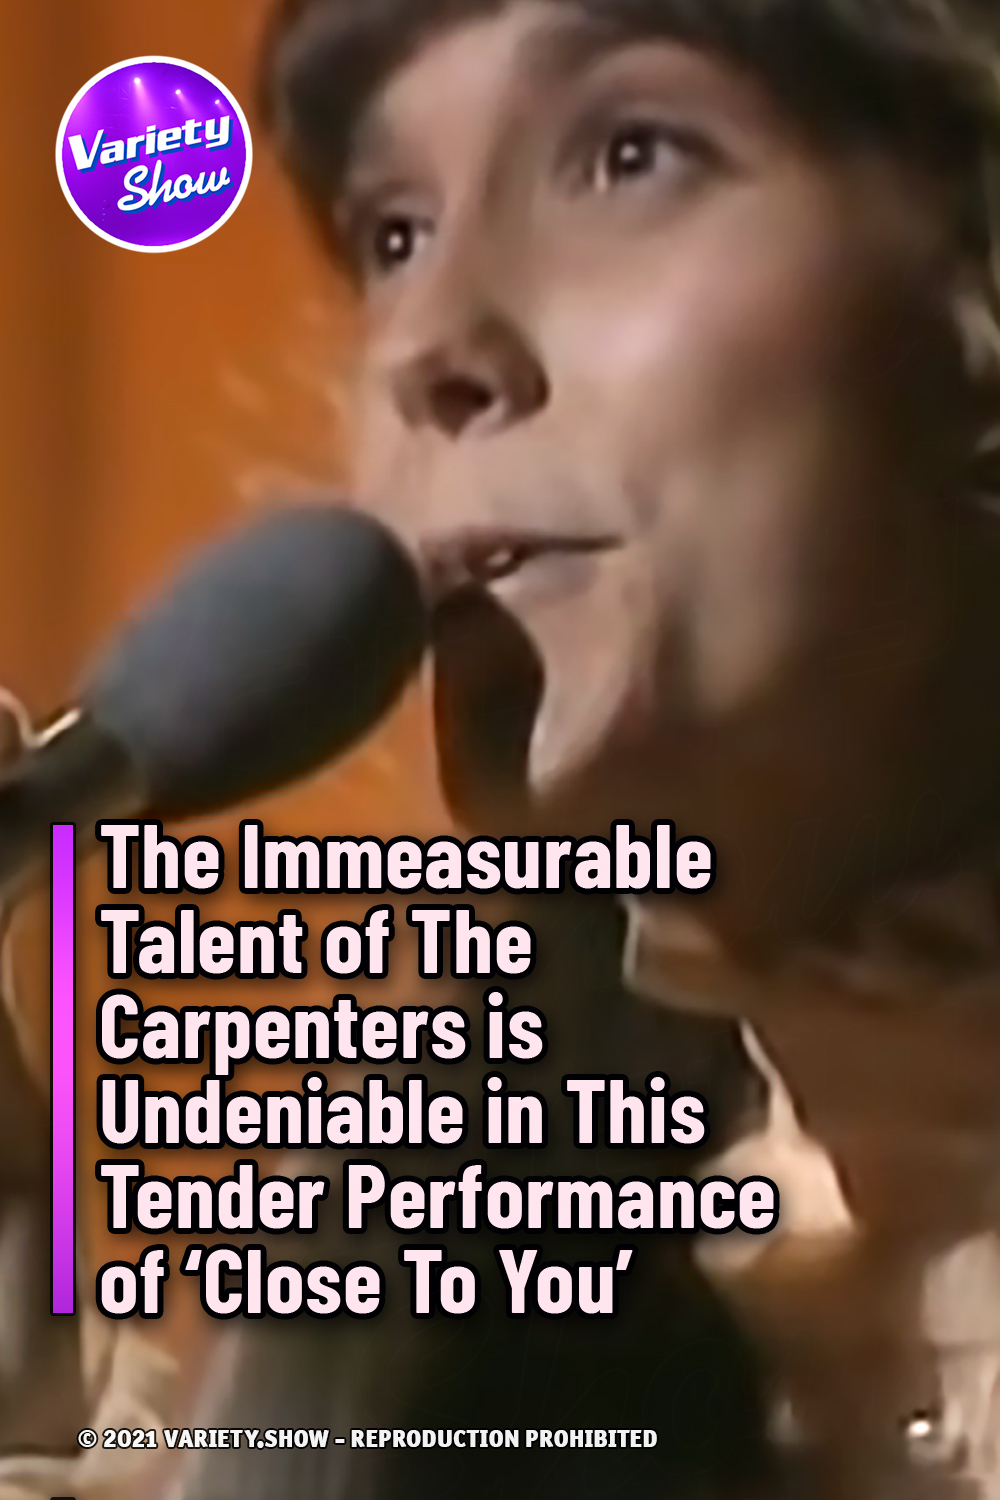 The Immeasurable Talent of The Carpenters is Undeniable in This Tender Performance of ‘Close To You’